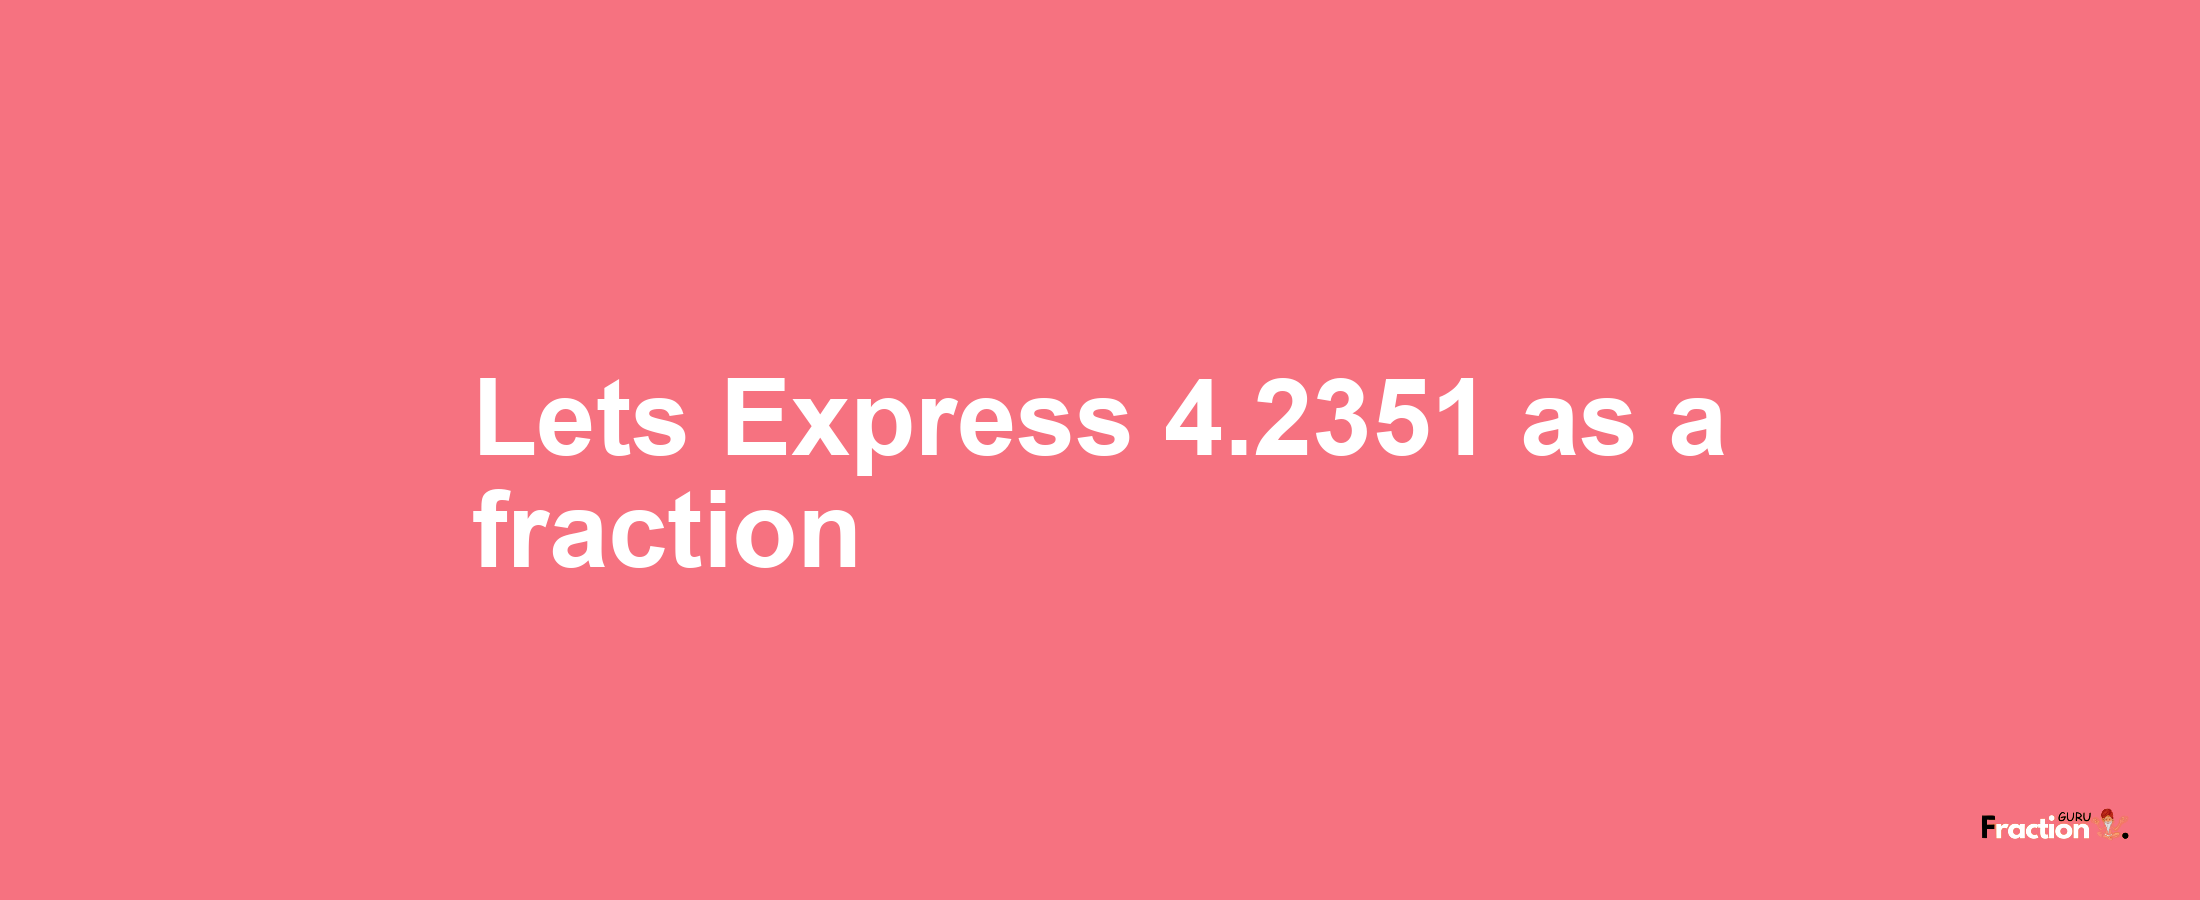 Lets Express 4.2351 as afraction